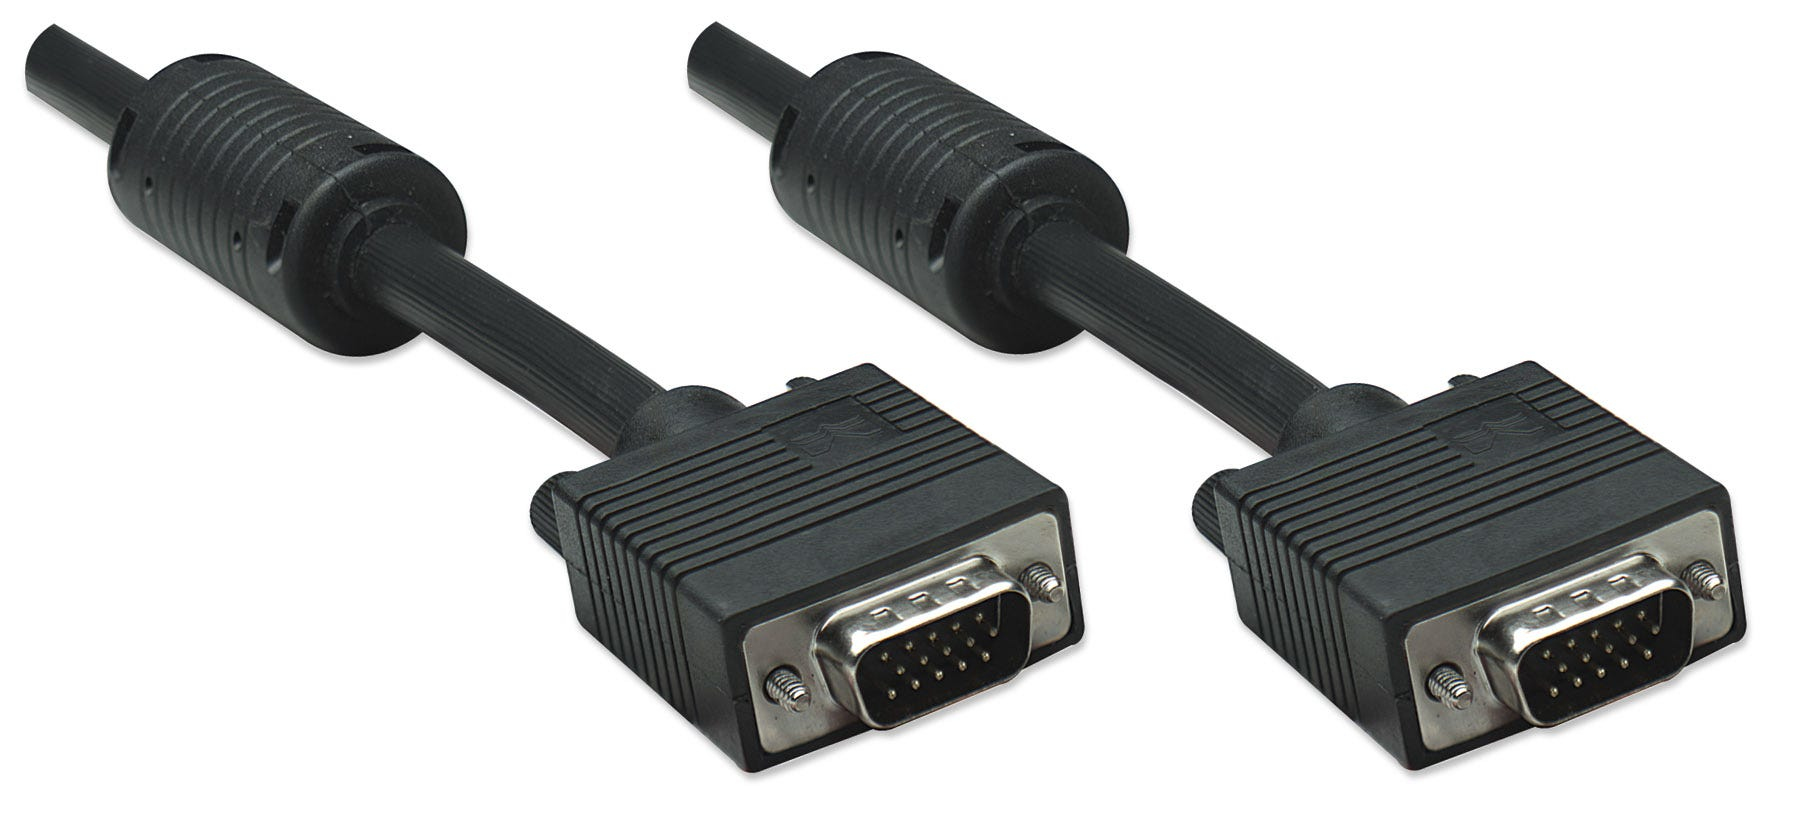 Manhattan VGA Monitor Cable (with Ferrite Cores), 1.8m, Black, Male to Male, HD15, Cable of higher SVGA Specification (fully compatible)